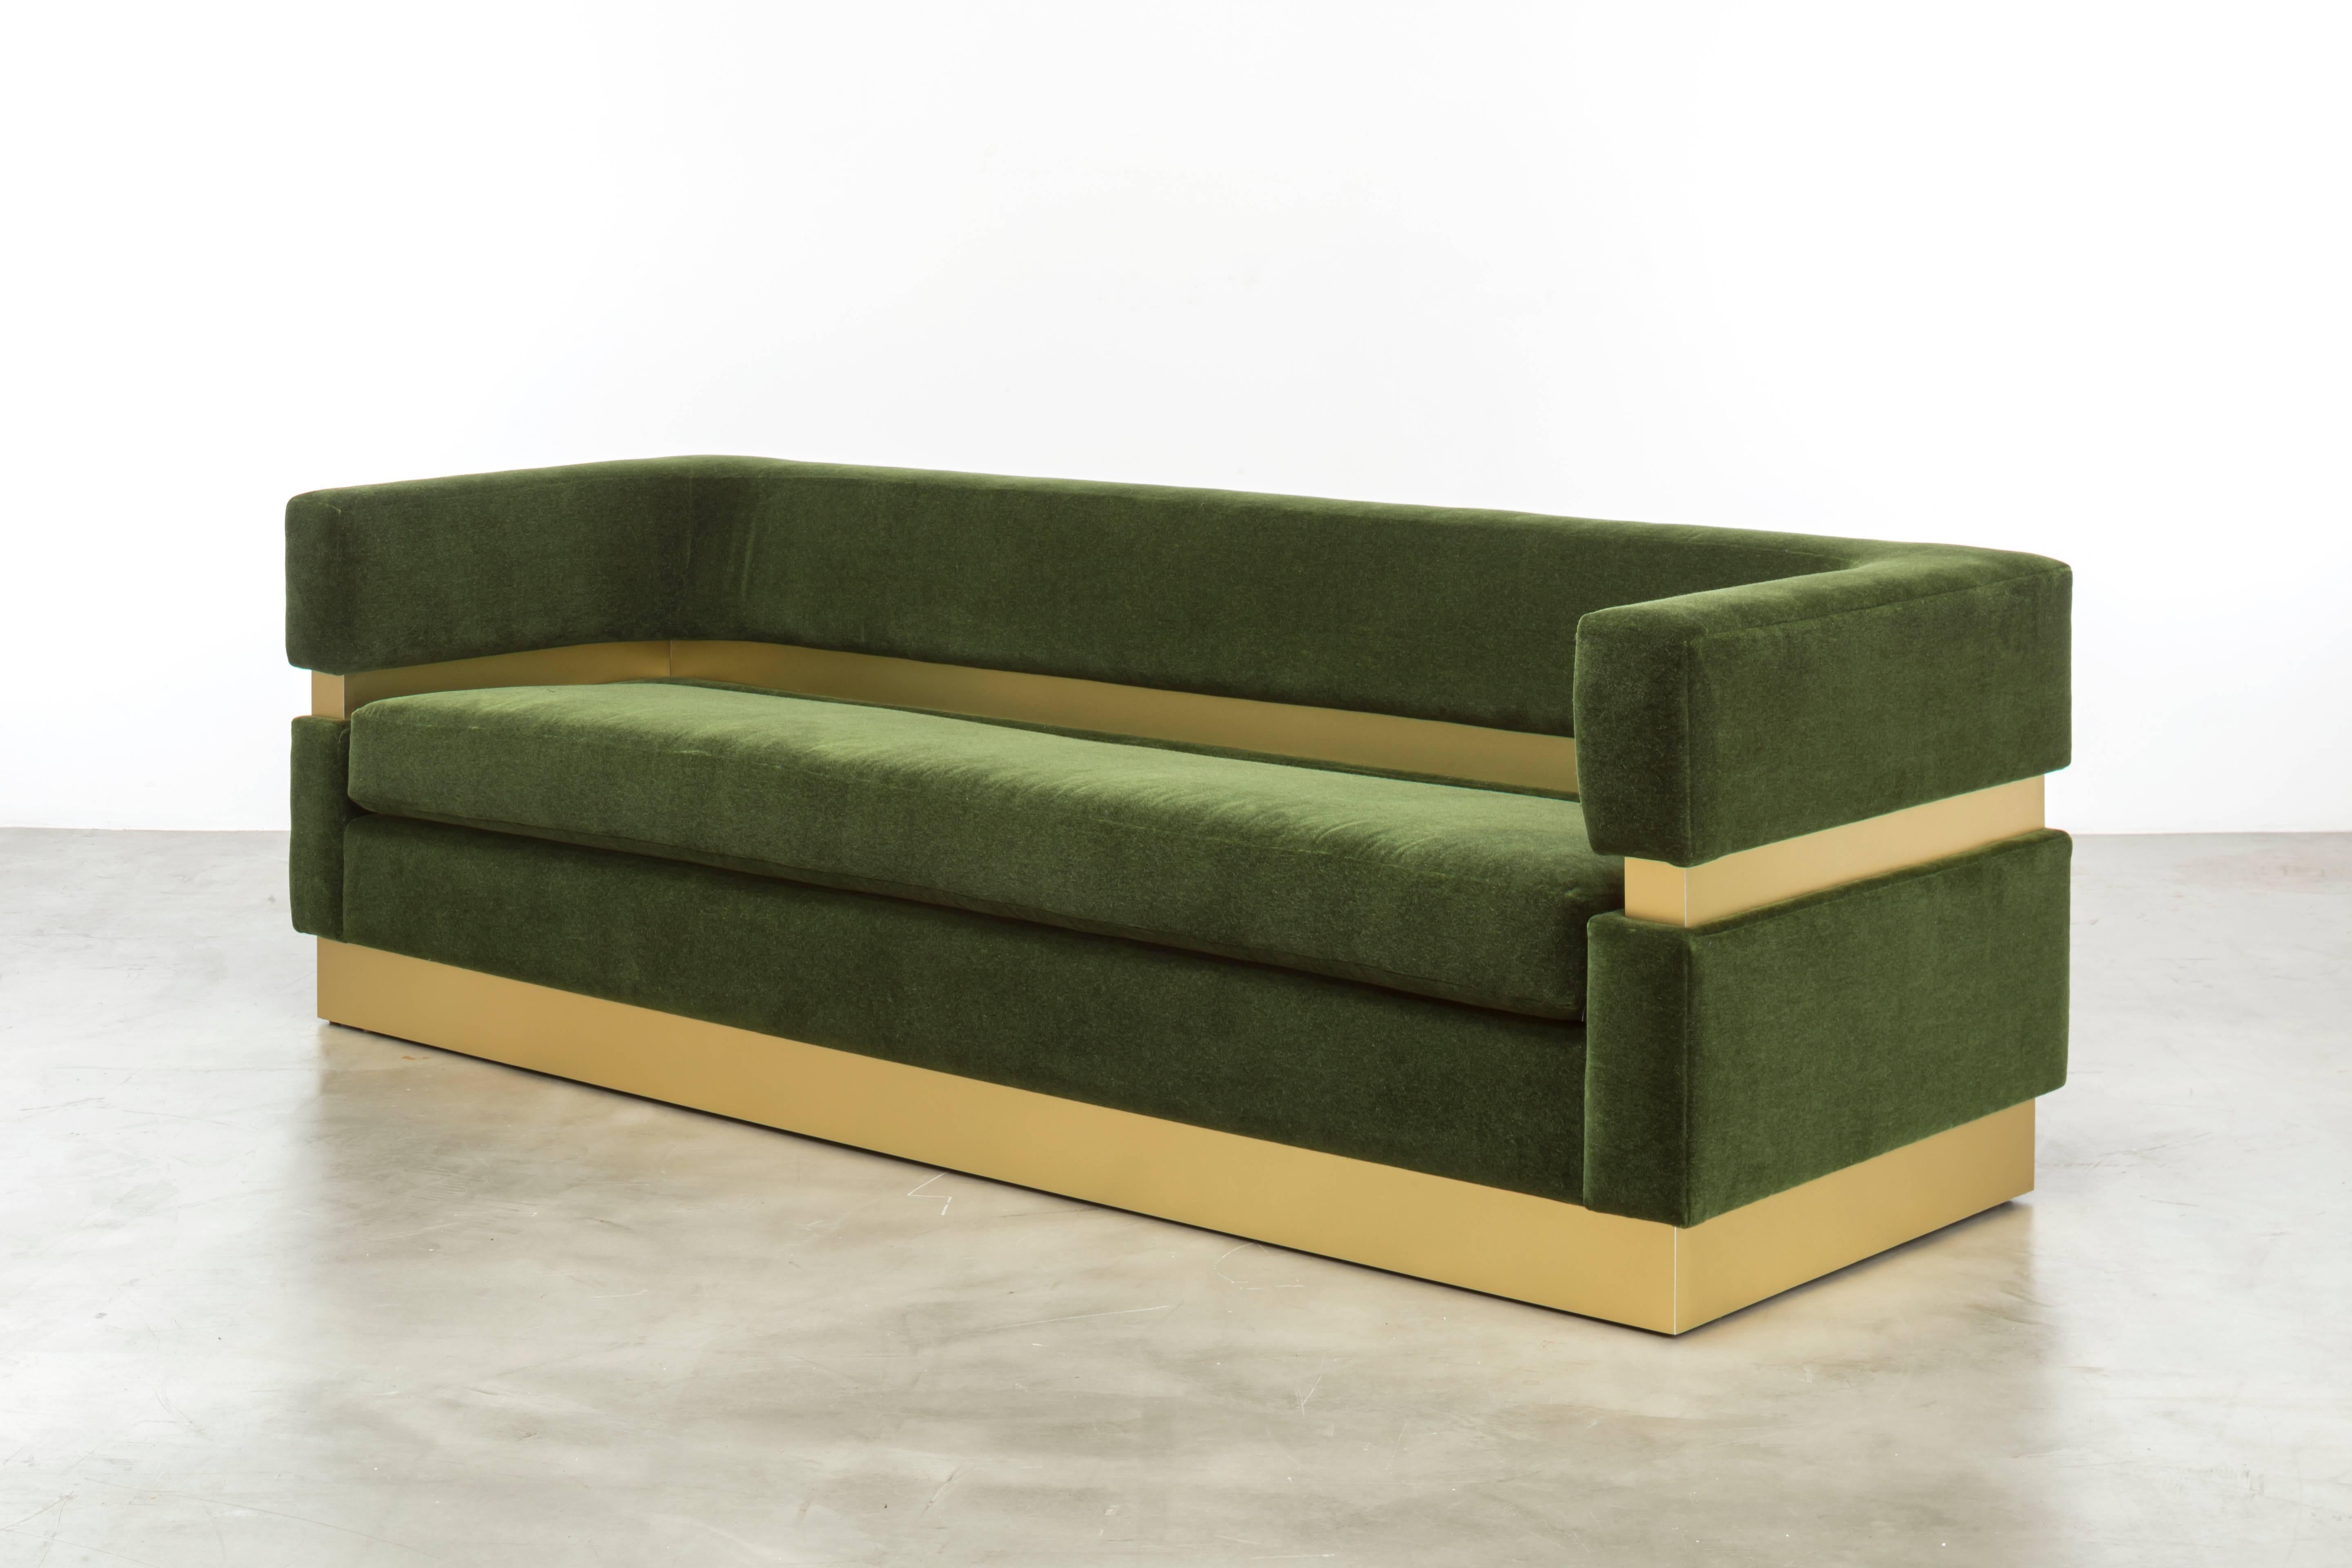 The Cardin Sofa features layers of upholstery and metal inlay to create a minimal and modern sitting statement.  Fully custom and made to order in California. As shown in Emerald Green Mohair $18,680.00.  Starting at $13,380.00